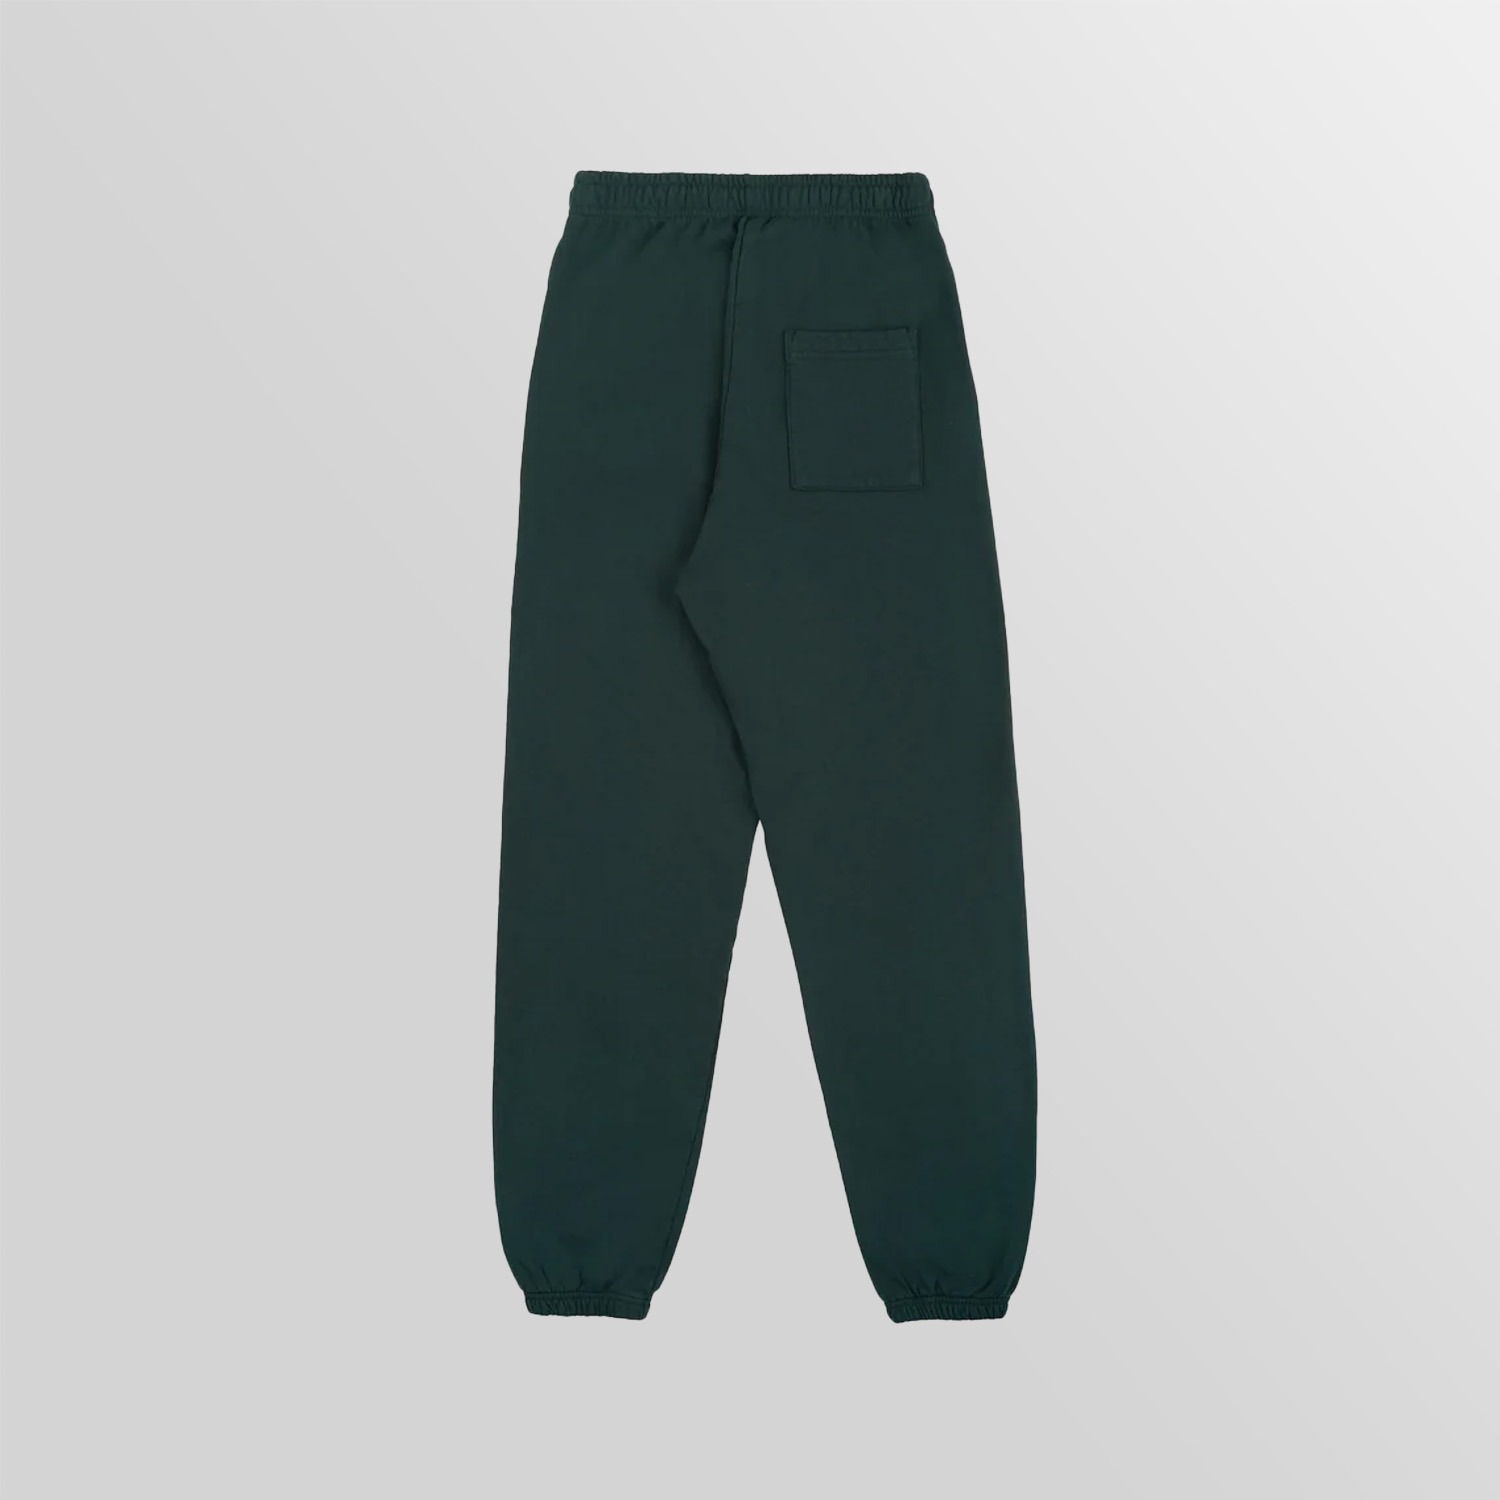 SERIF LOGO EMBROIDERED SWEATPANT (FOREST)